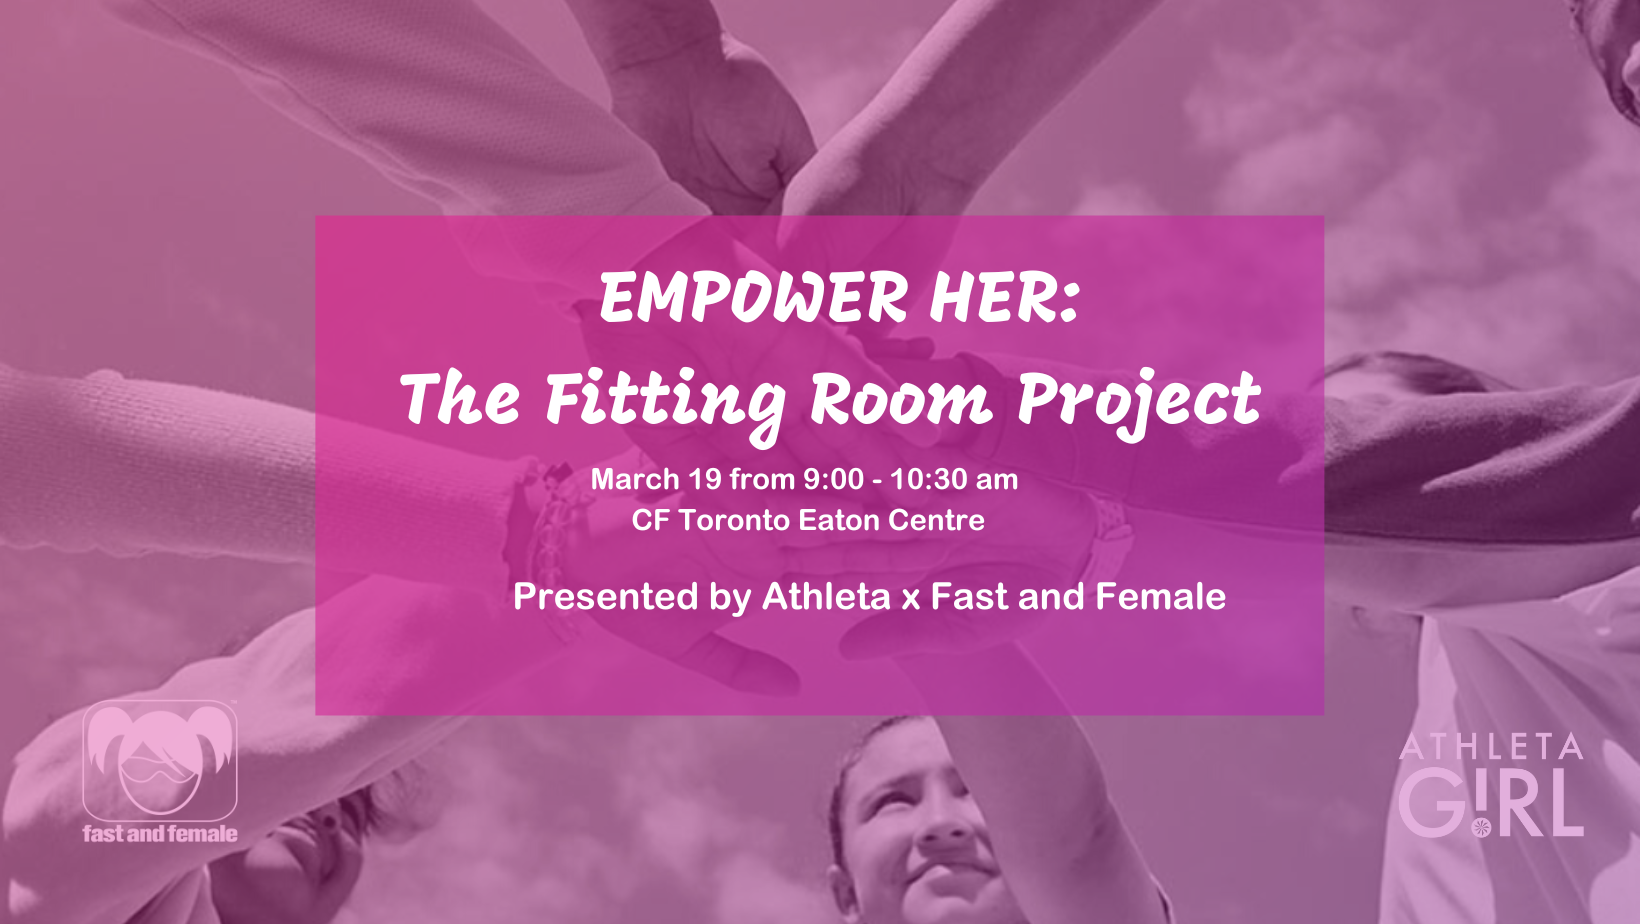 https://sirc.ca/wp-content/uploads/ninja-forms/16/EMPOWER-HER-The-Fitting-Room-Project-2.png